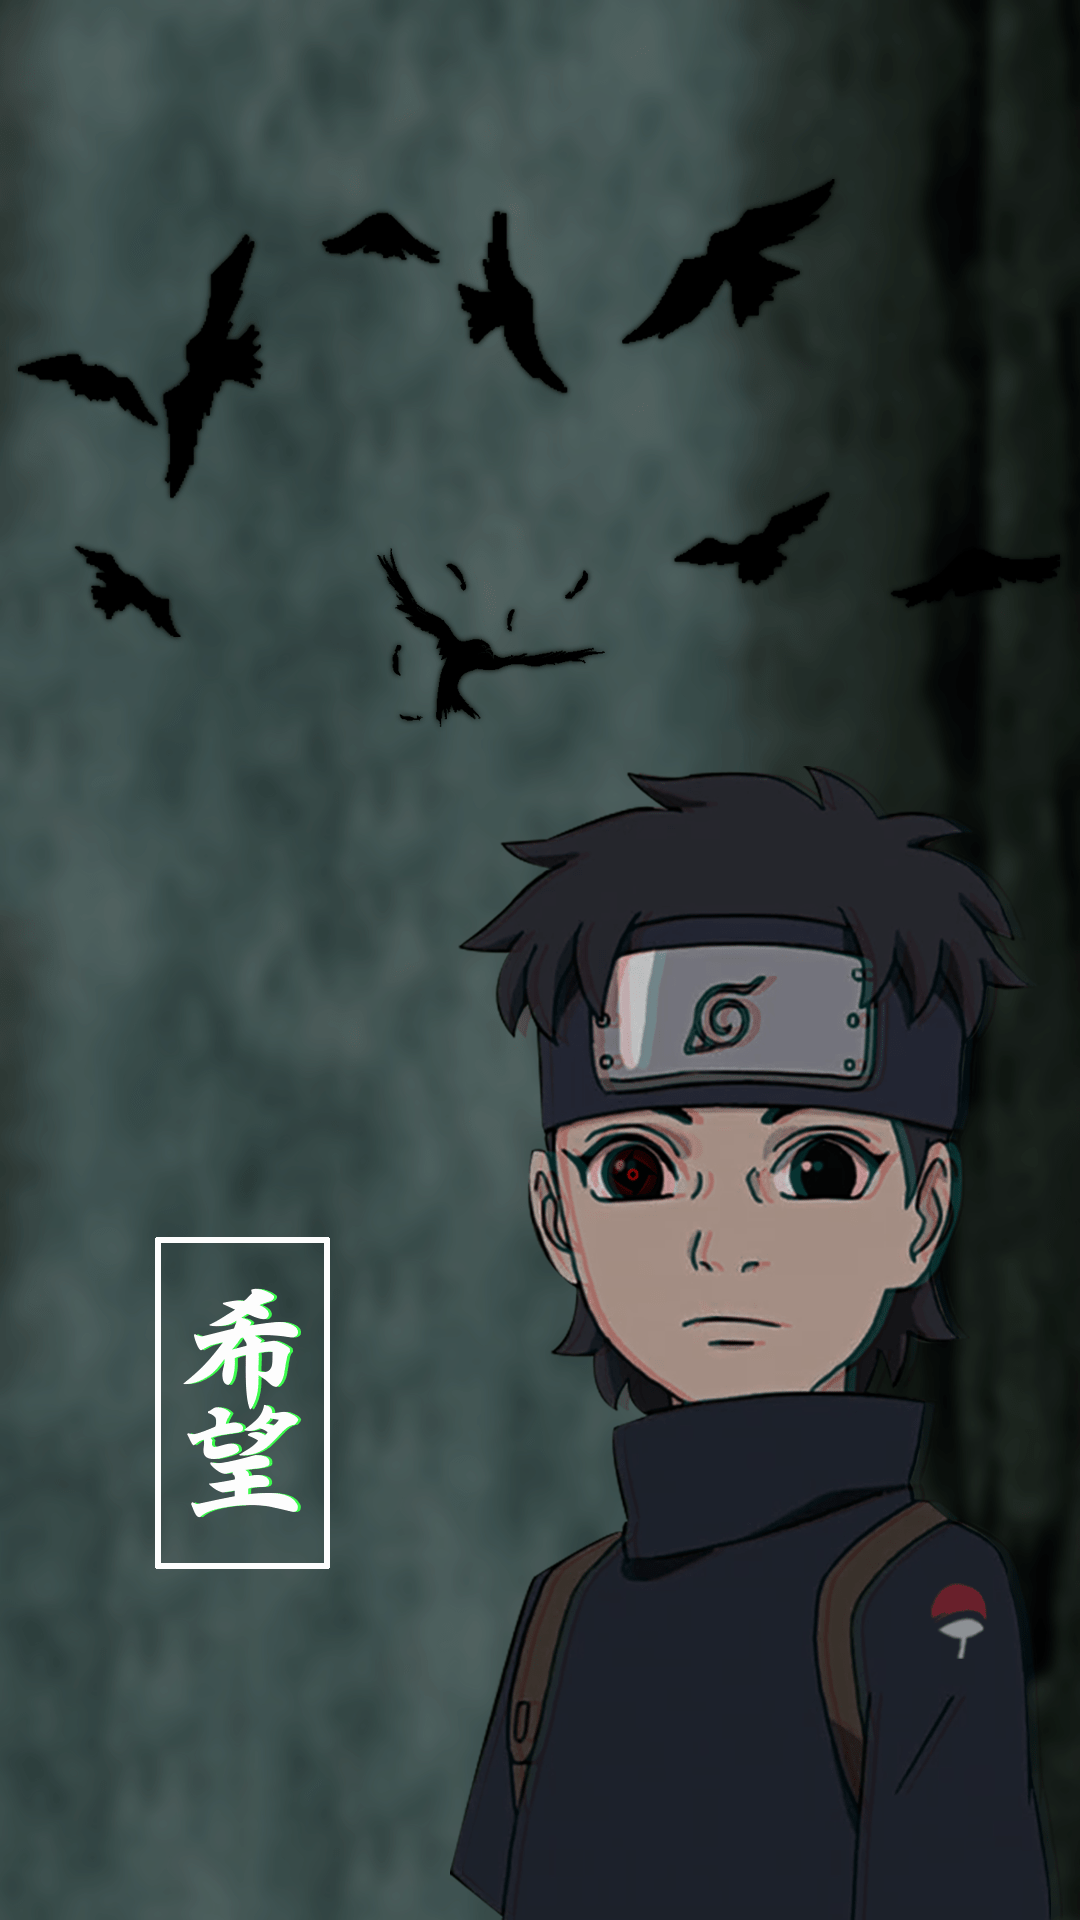 Naruto Aesthetic Wallpapers - Top Free Naruto Aesthetic Backgrounds